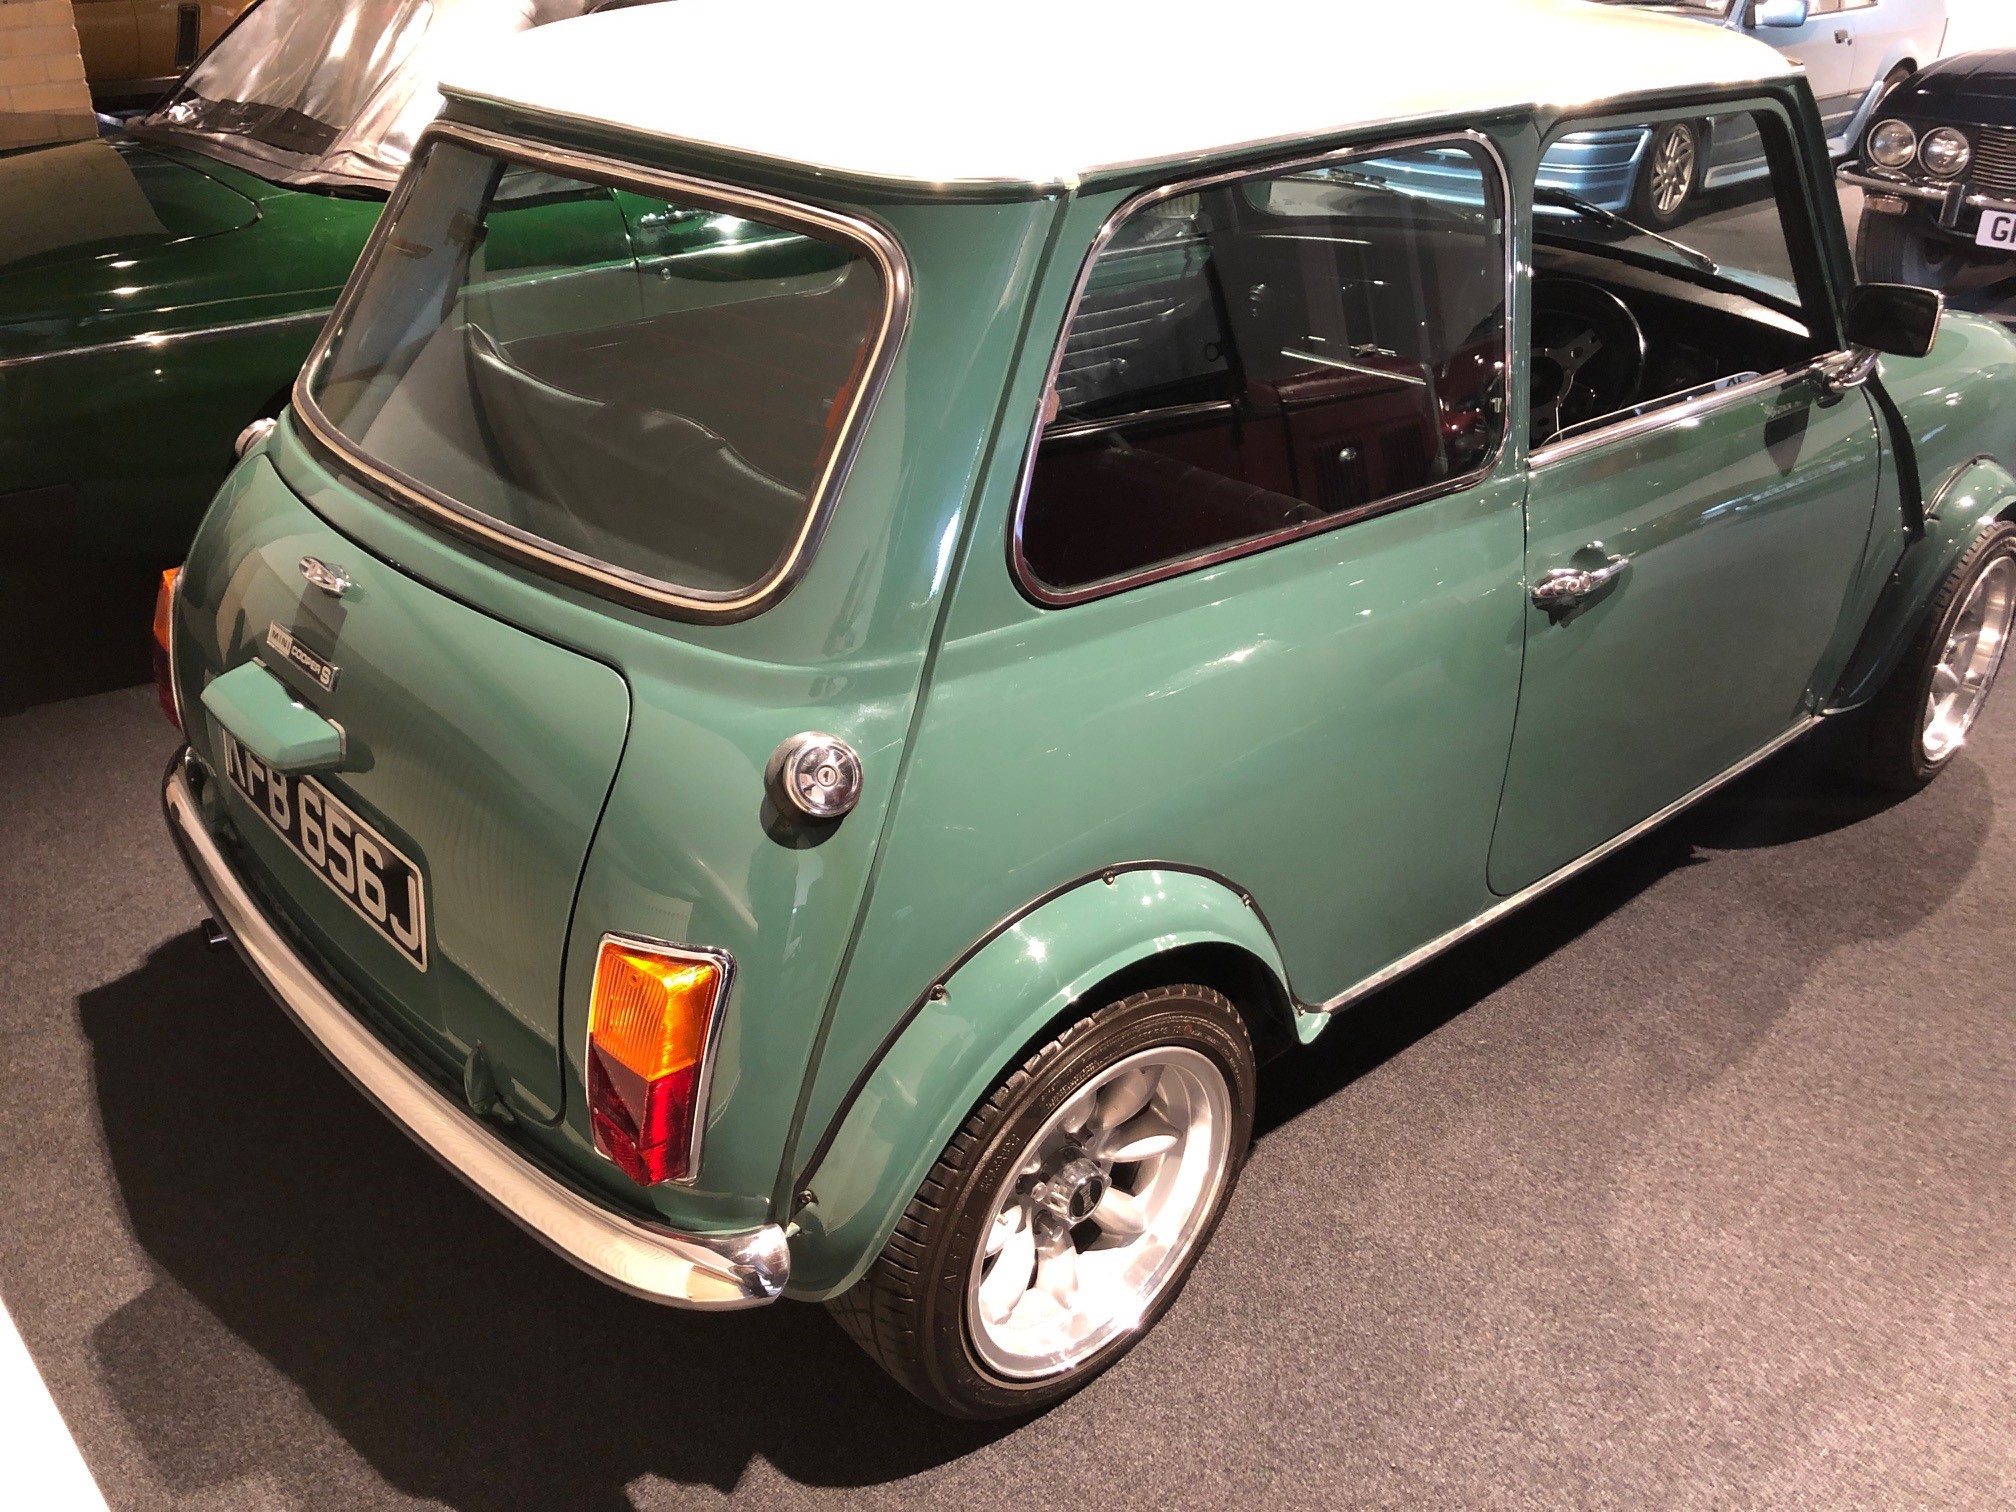 1971 Mini Cooper S Recreation Registration number KFB 656J Green with a white roof Black interior - Image 18 of 23